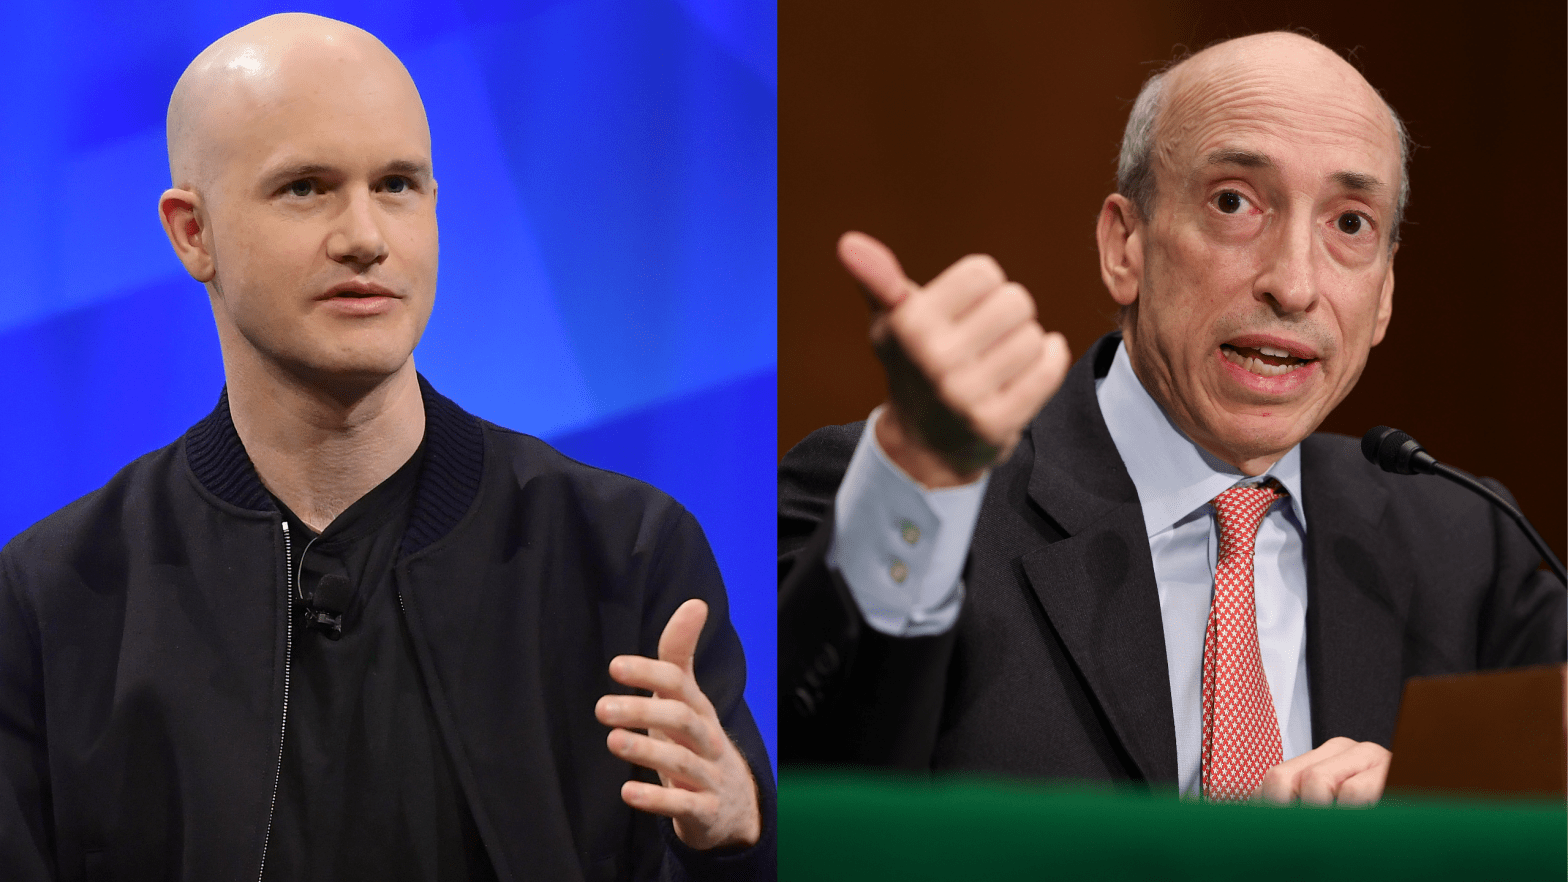 Coinbase CEO Brian Armstrong (left) and SEC Chair Gary Gensler (right) continue to butt heads in a new Coinbase petition against the agency. (Photo: Matt Winkelmeyer / Kevin Dietsch / Gizmodo, Getty Images)